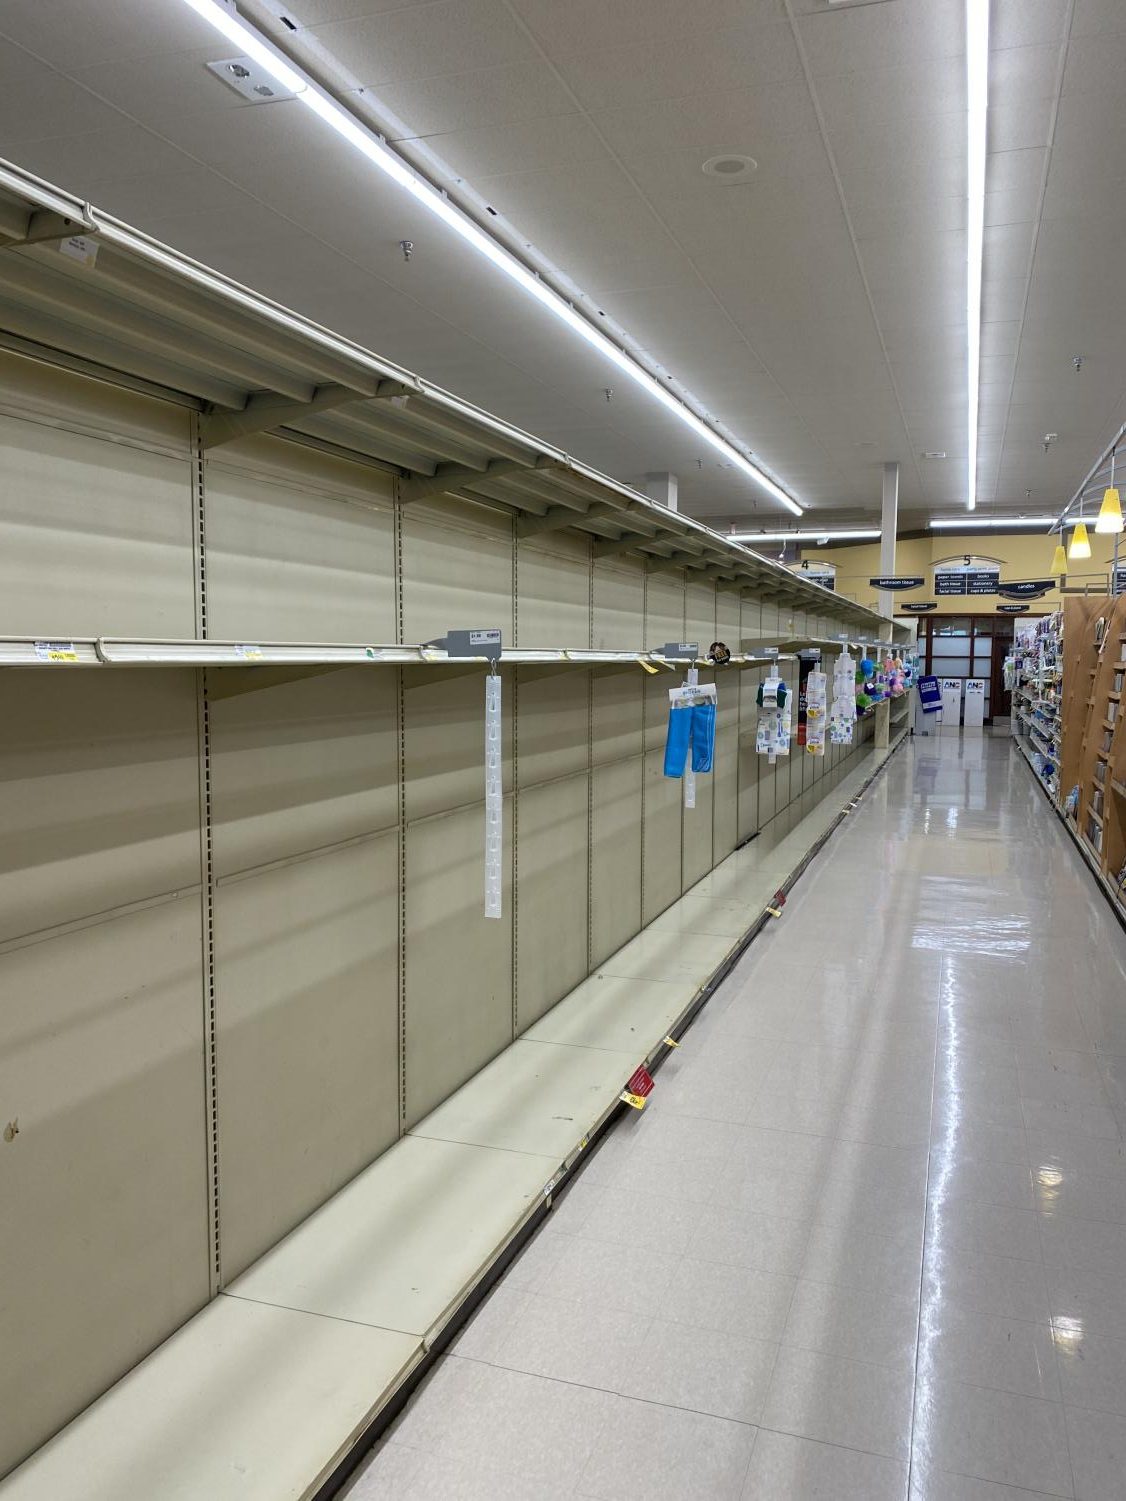 Safeway+Grocery+Store+Has+Trouble+Keeping+Shelves+Full